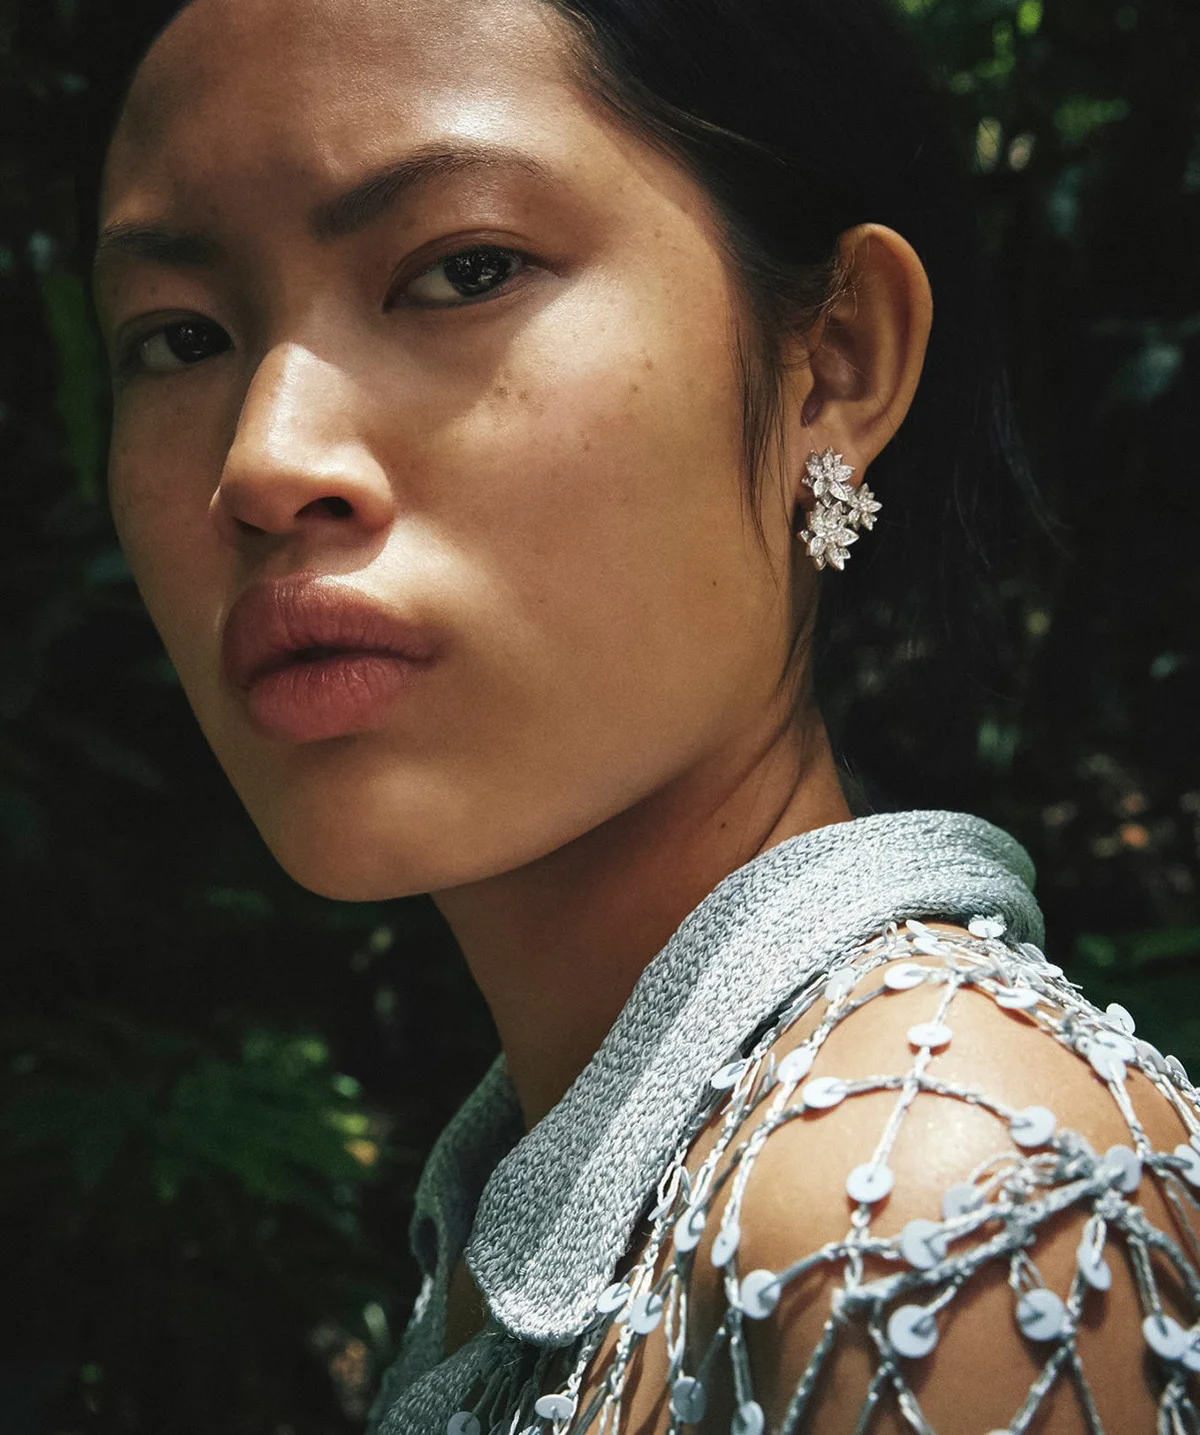 Ploy Rida and Yixin Zhao by Charles Dennington for Vogue Australia March 2022